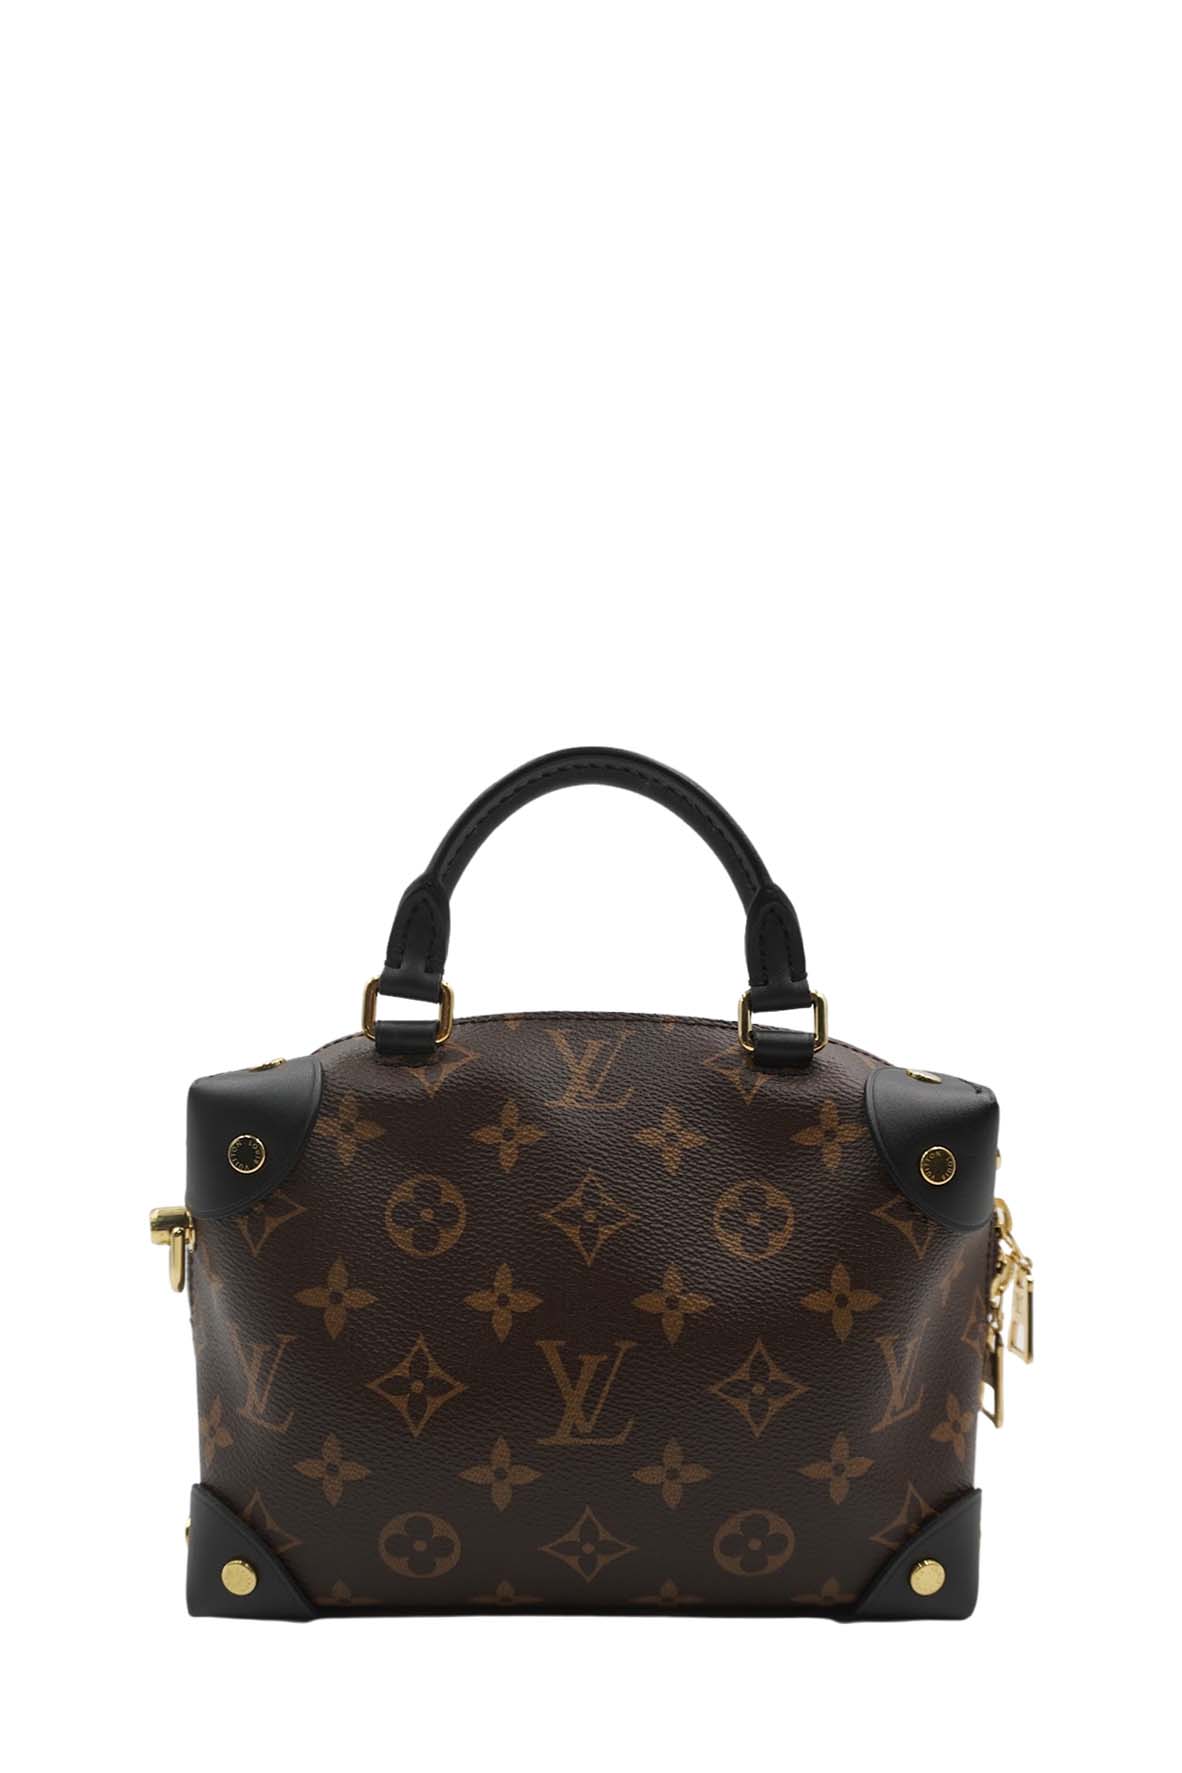 Petite malle leather crossbody bag Louis Vuitton Brown in Leather - 25166857